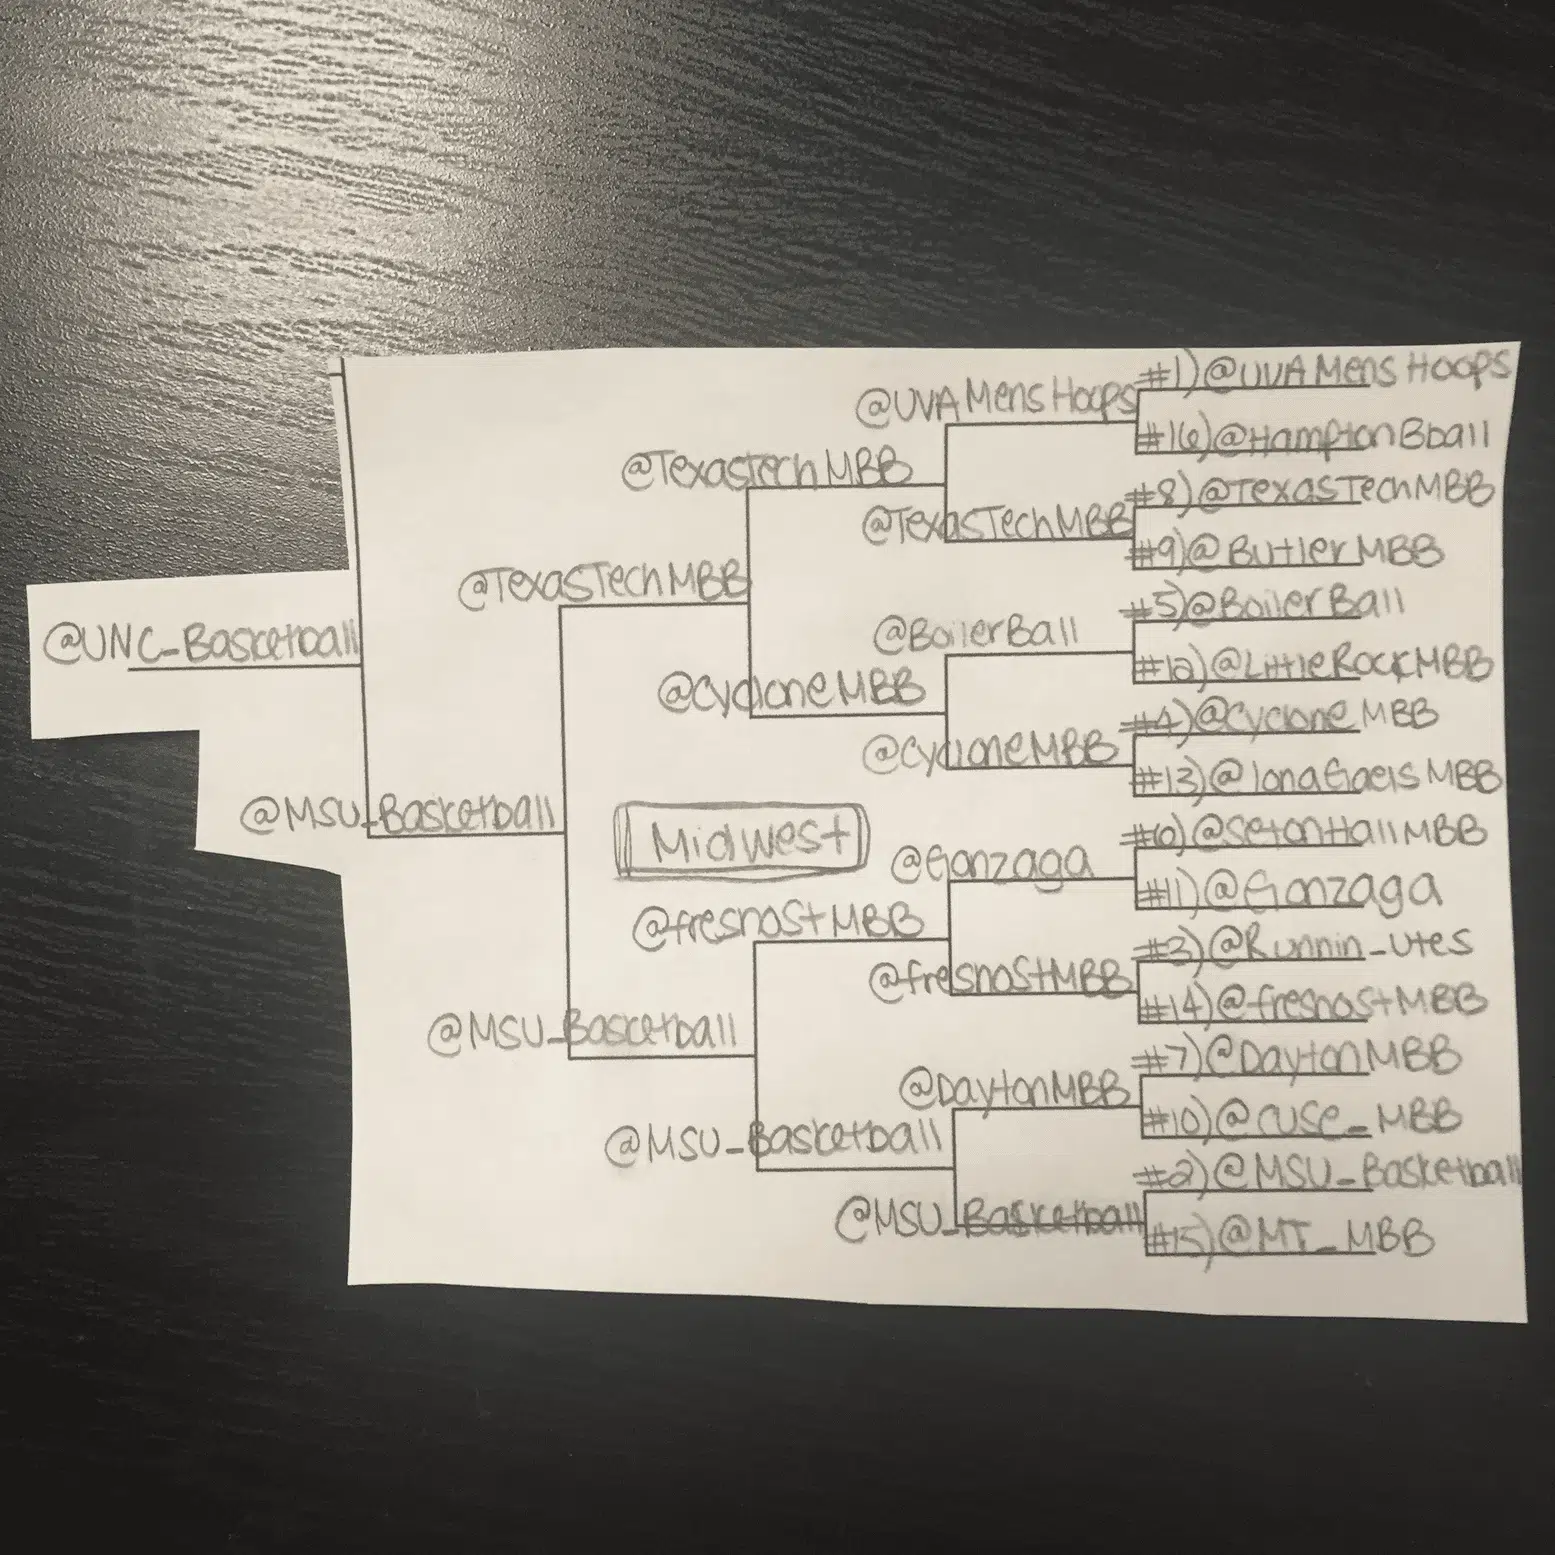 mid-west bracket march madness